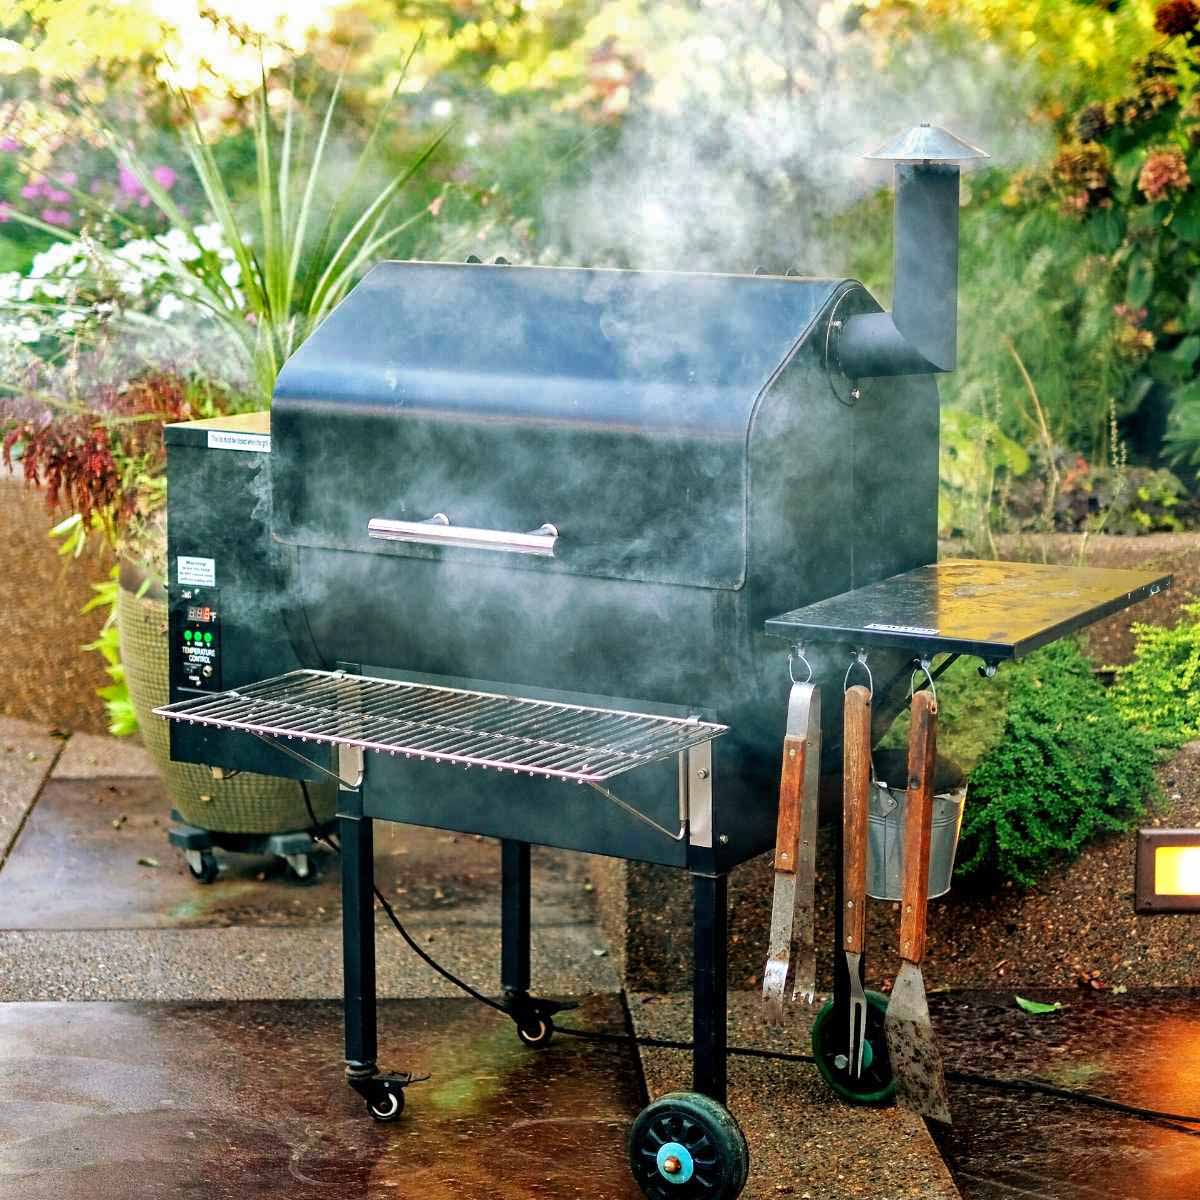 A hot smoker grill with smoke wafting around it, set in a pretty garden patio area.